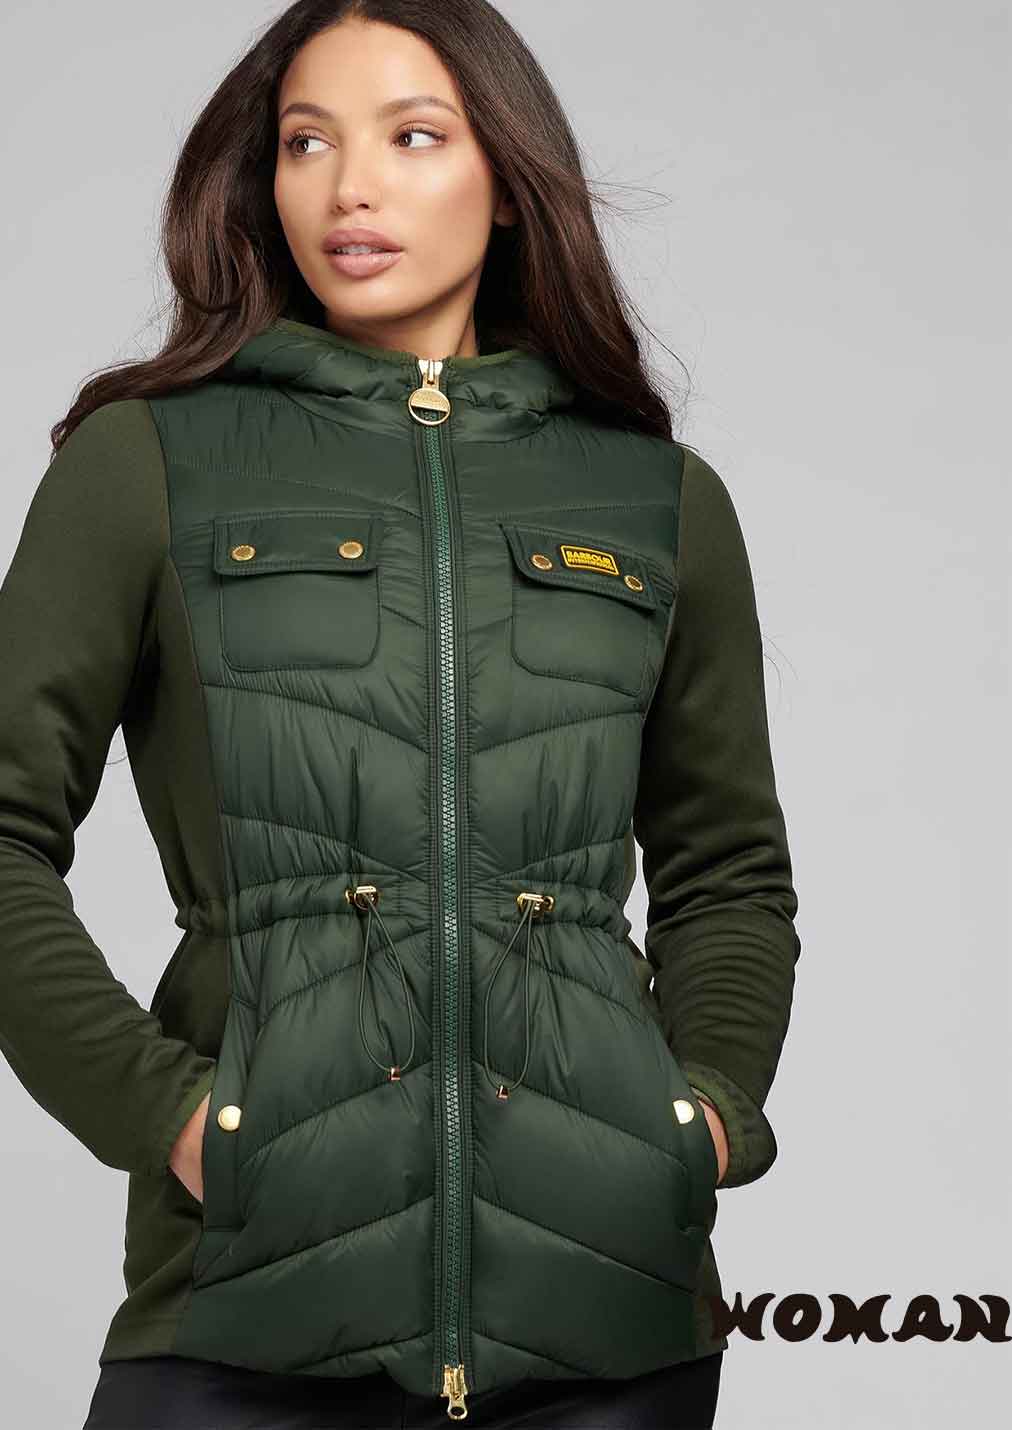 Chaqueta BARBOUR Cookstown